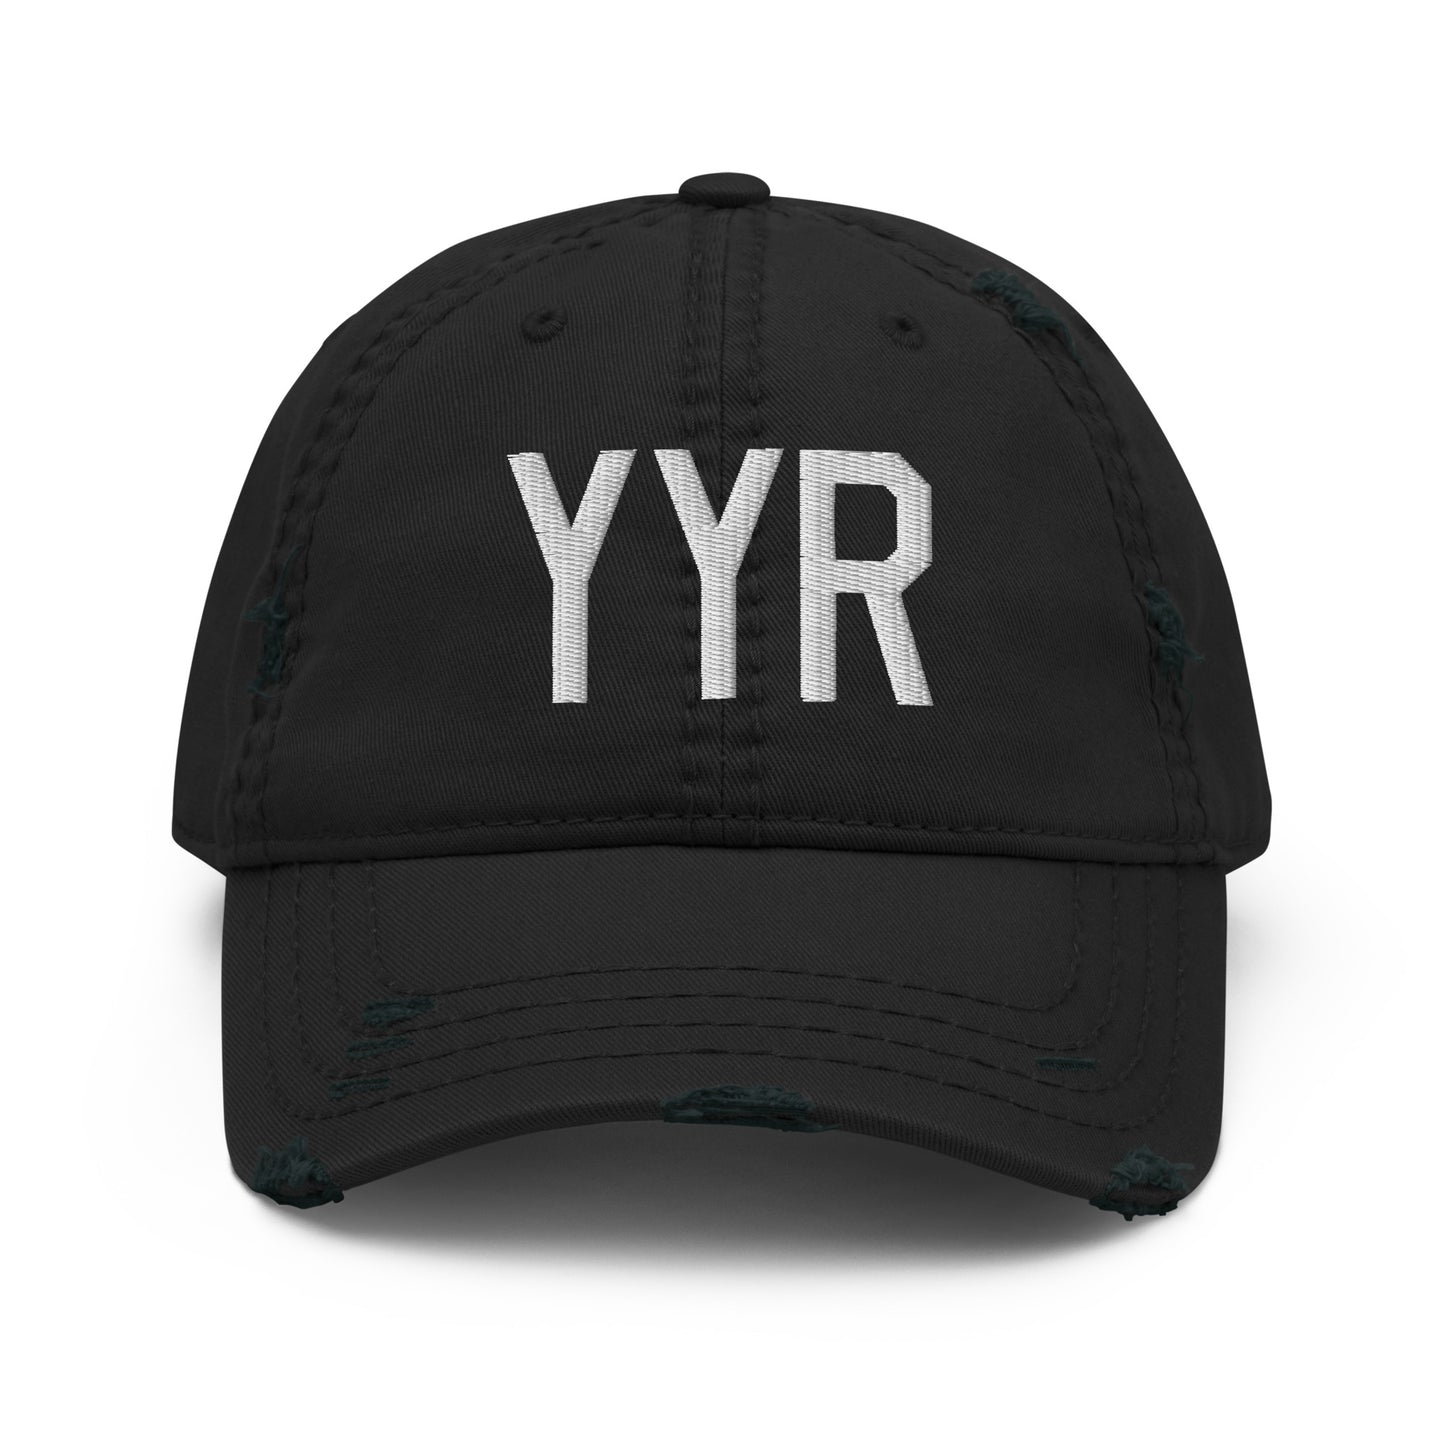 Airport Code Distressed Hat - White • YYR Goose Bay • YHM Designs - Image 10